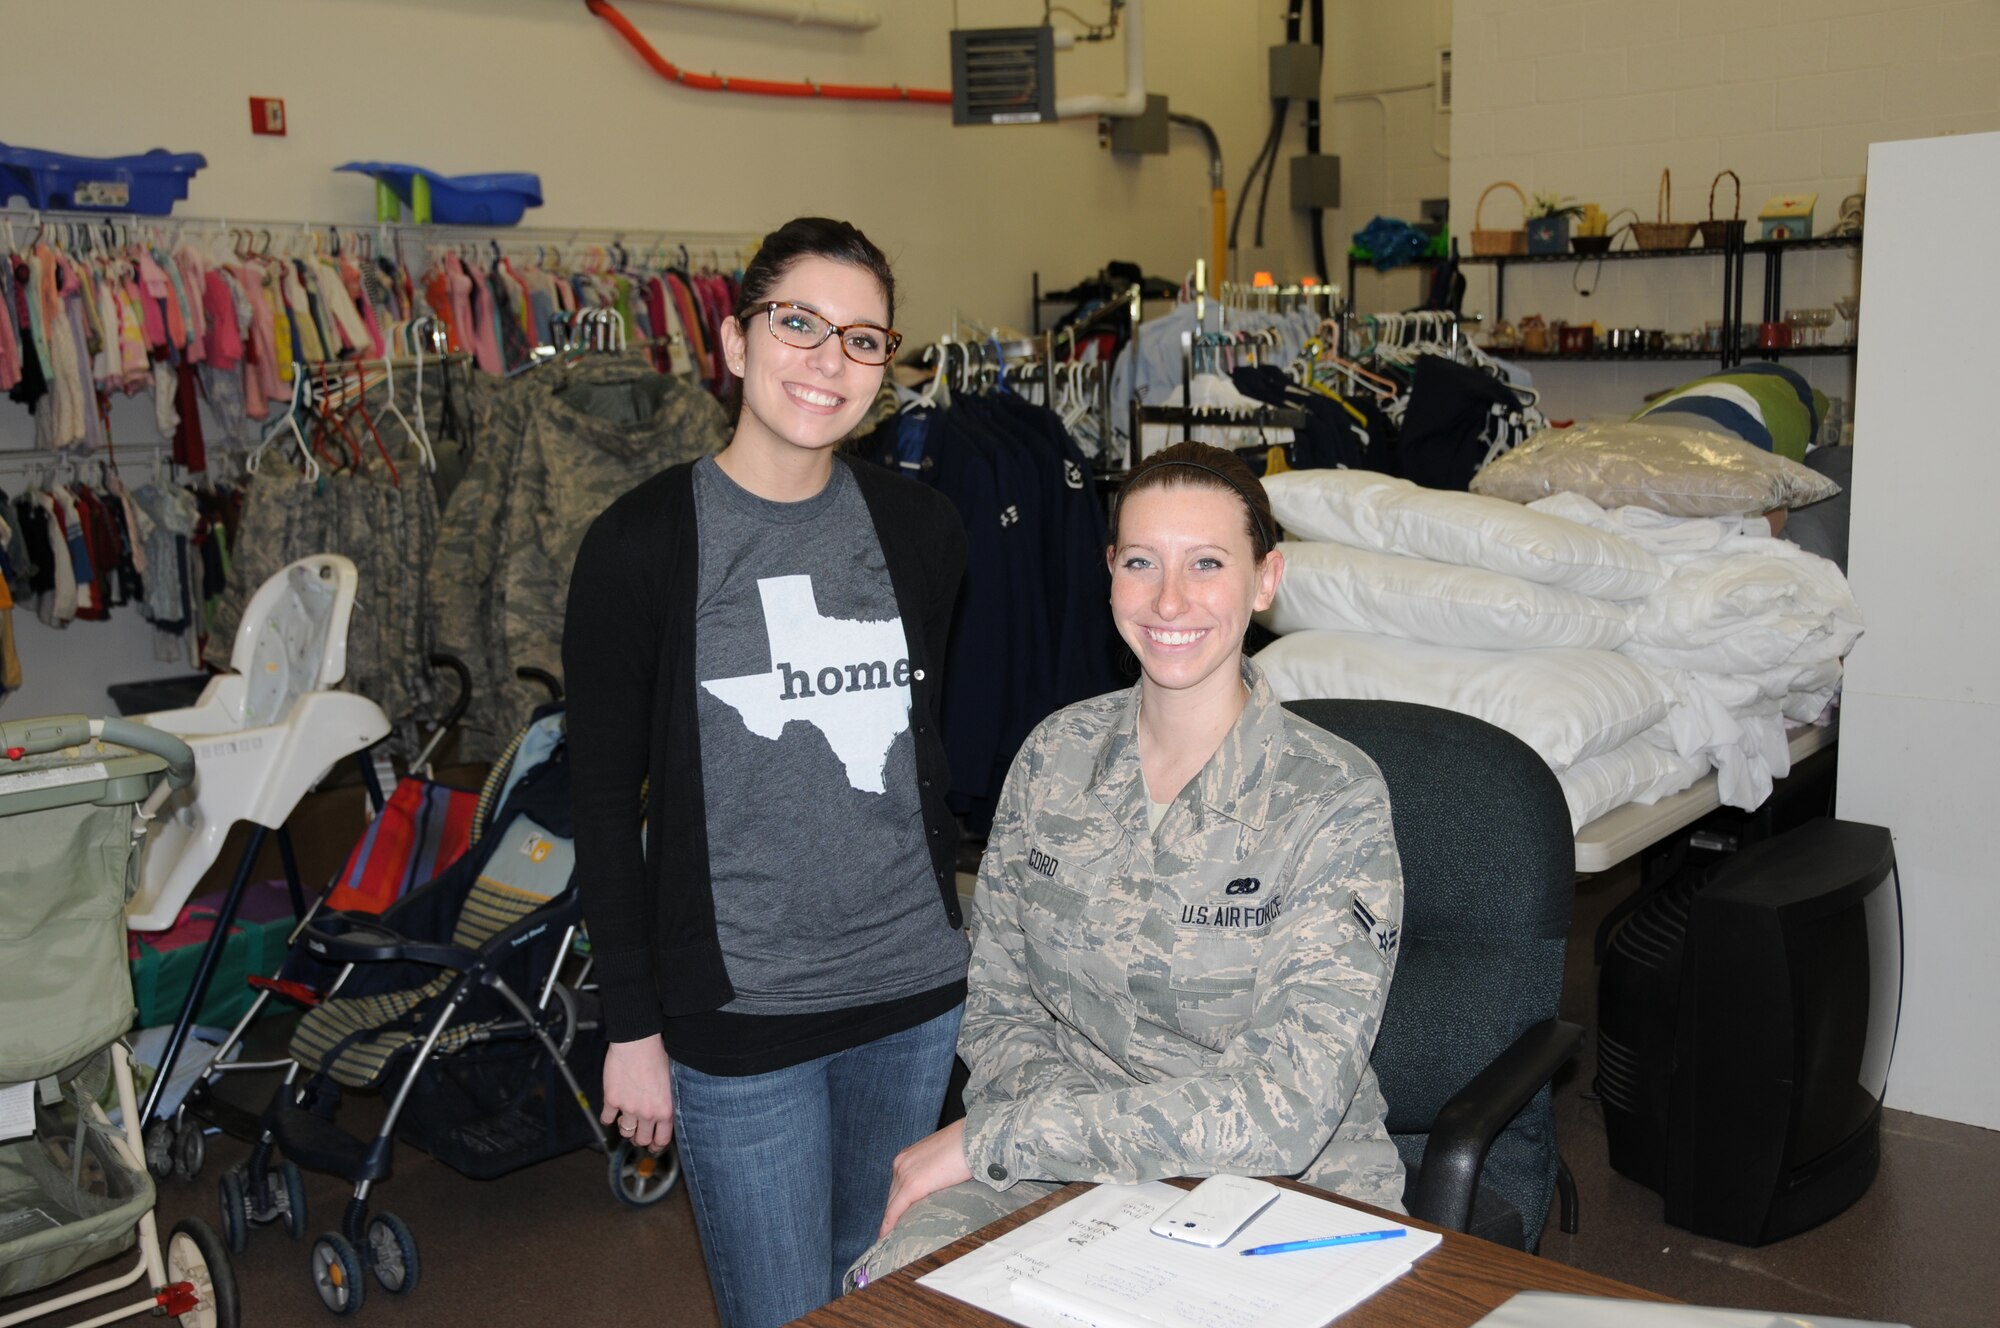 Lauren Gaylord (left) and Airman 1st Class Lori Cord are volunteers who spend several hours on Wednesdays assisting patrons in choosing items from among the numerous donated items at the Airman's Attic, Dover Air Force Base, Del. Other duties of a volunteer include sorting through new donations and organizing them onto display racks. (U.S. Air Force photo/Senior Airman Joe Yanik)